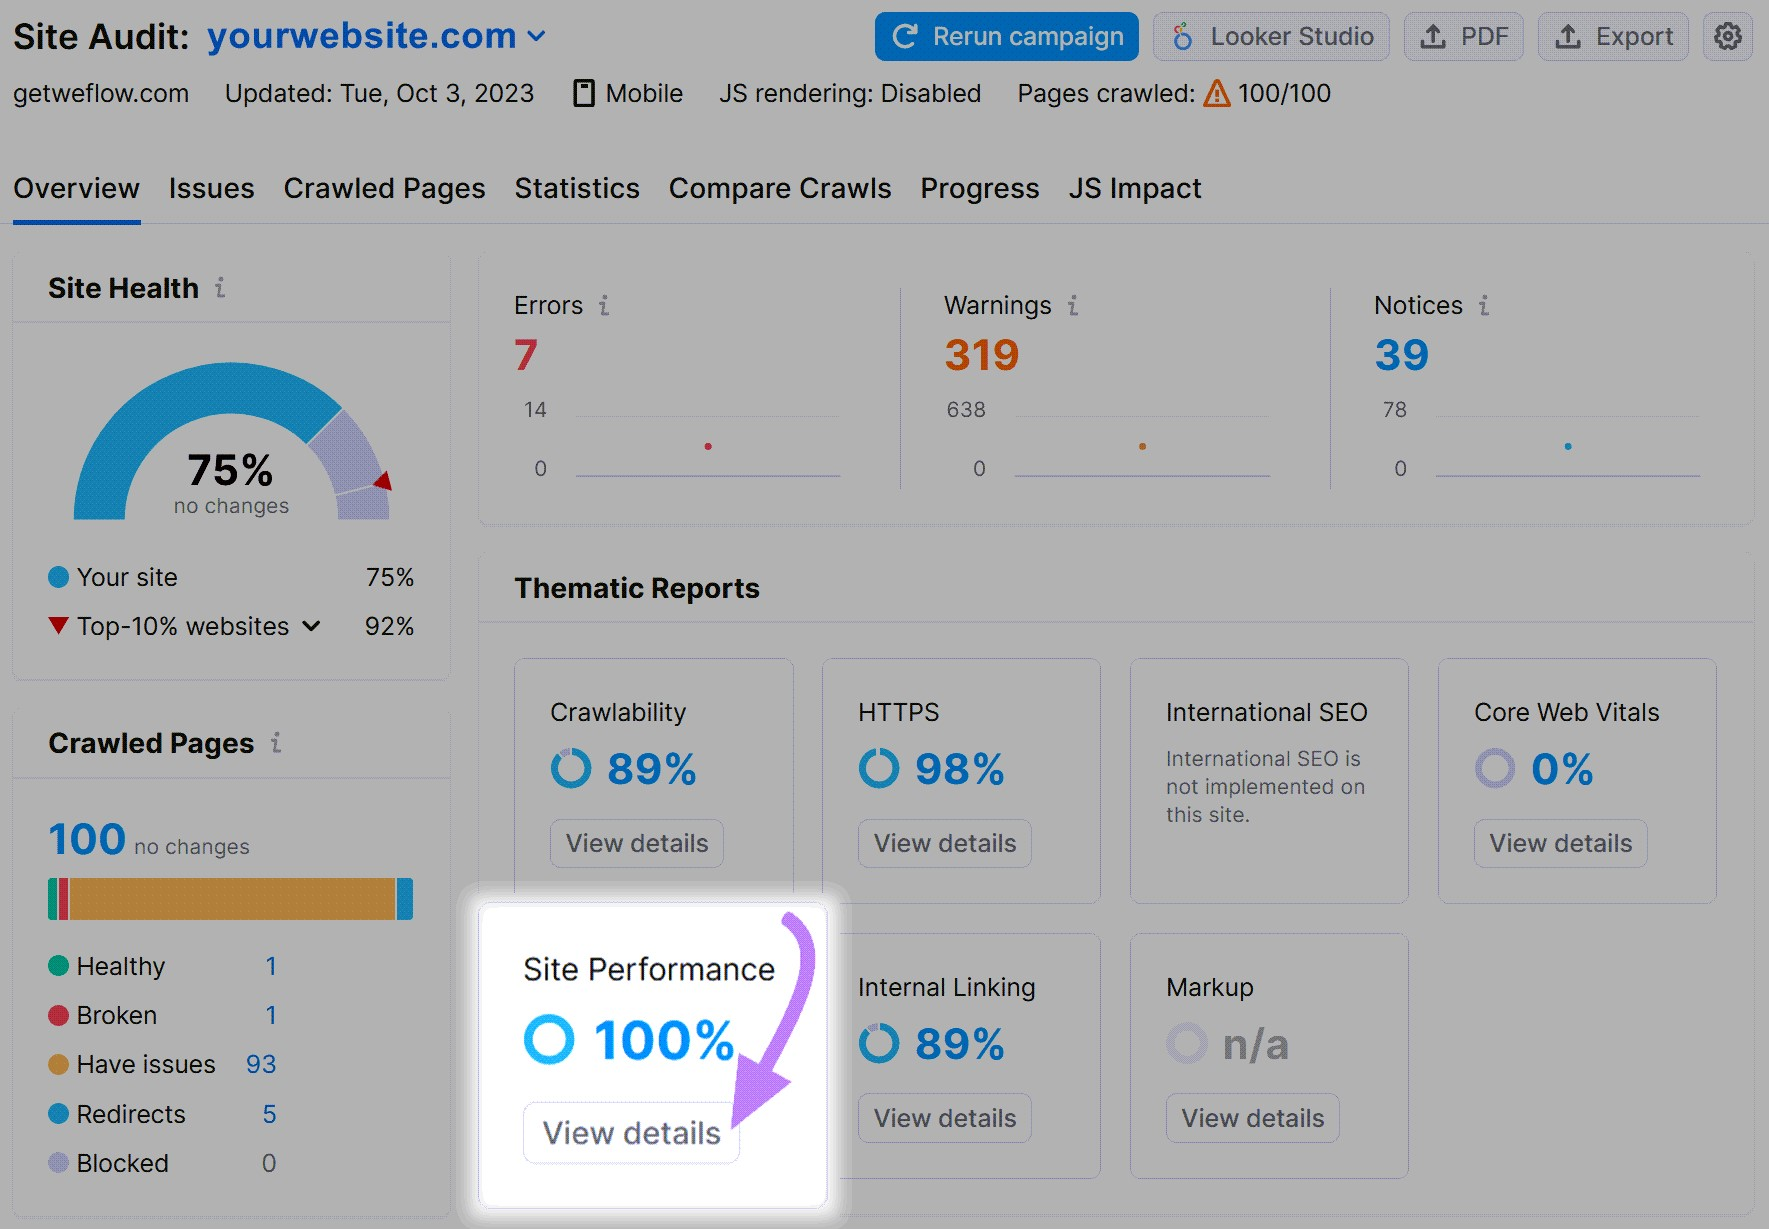 “Site Performance” widget highlighted in the Site Audit overview report